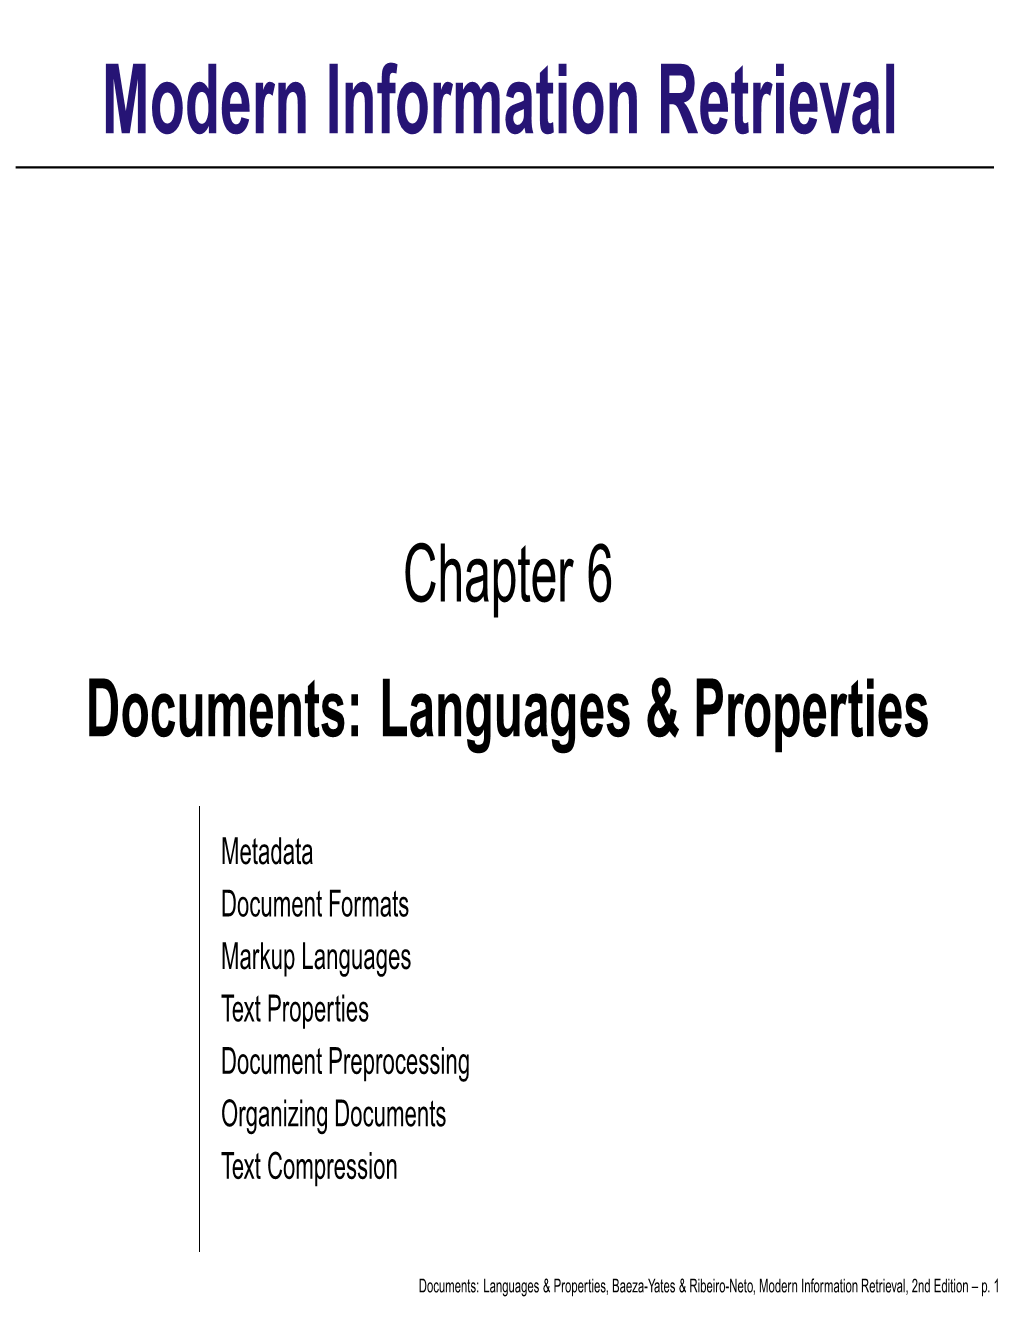 Languages and Properties